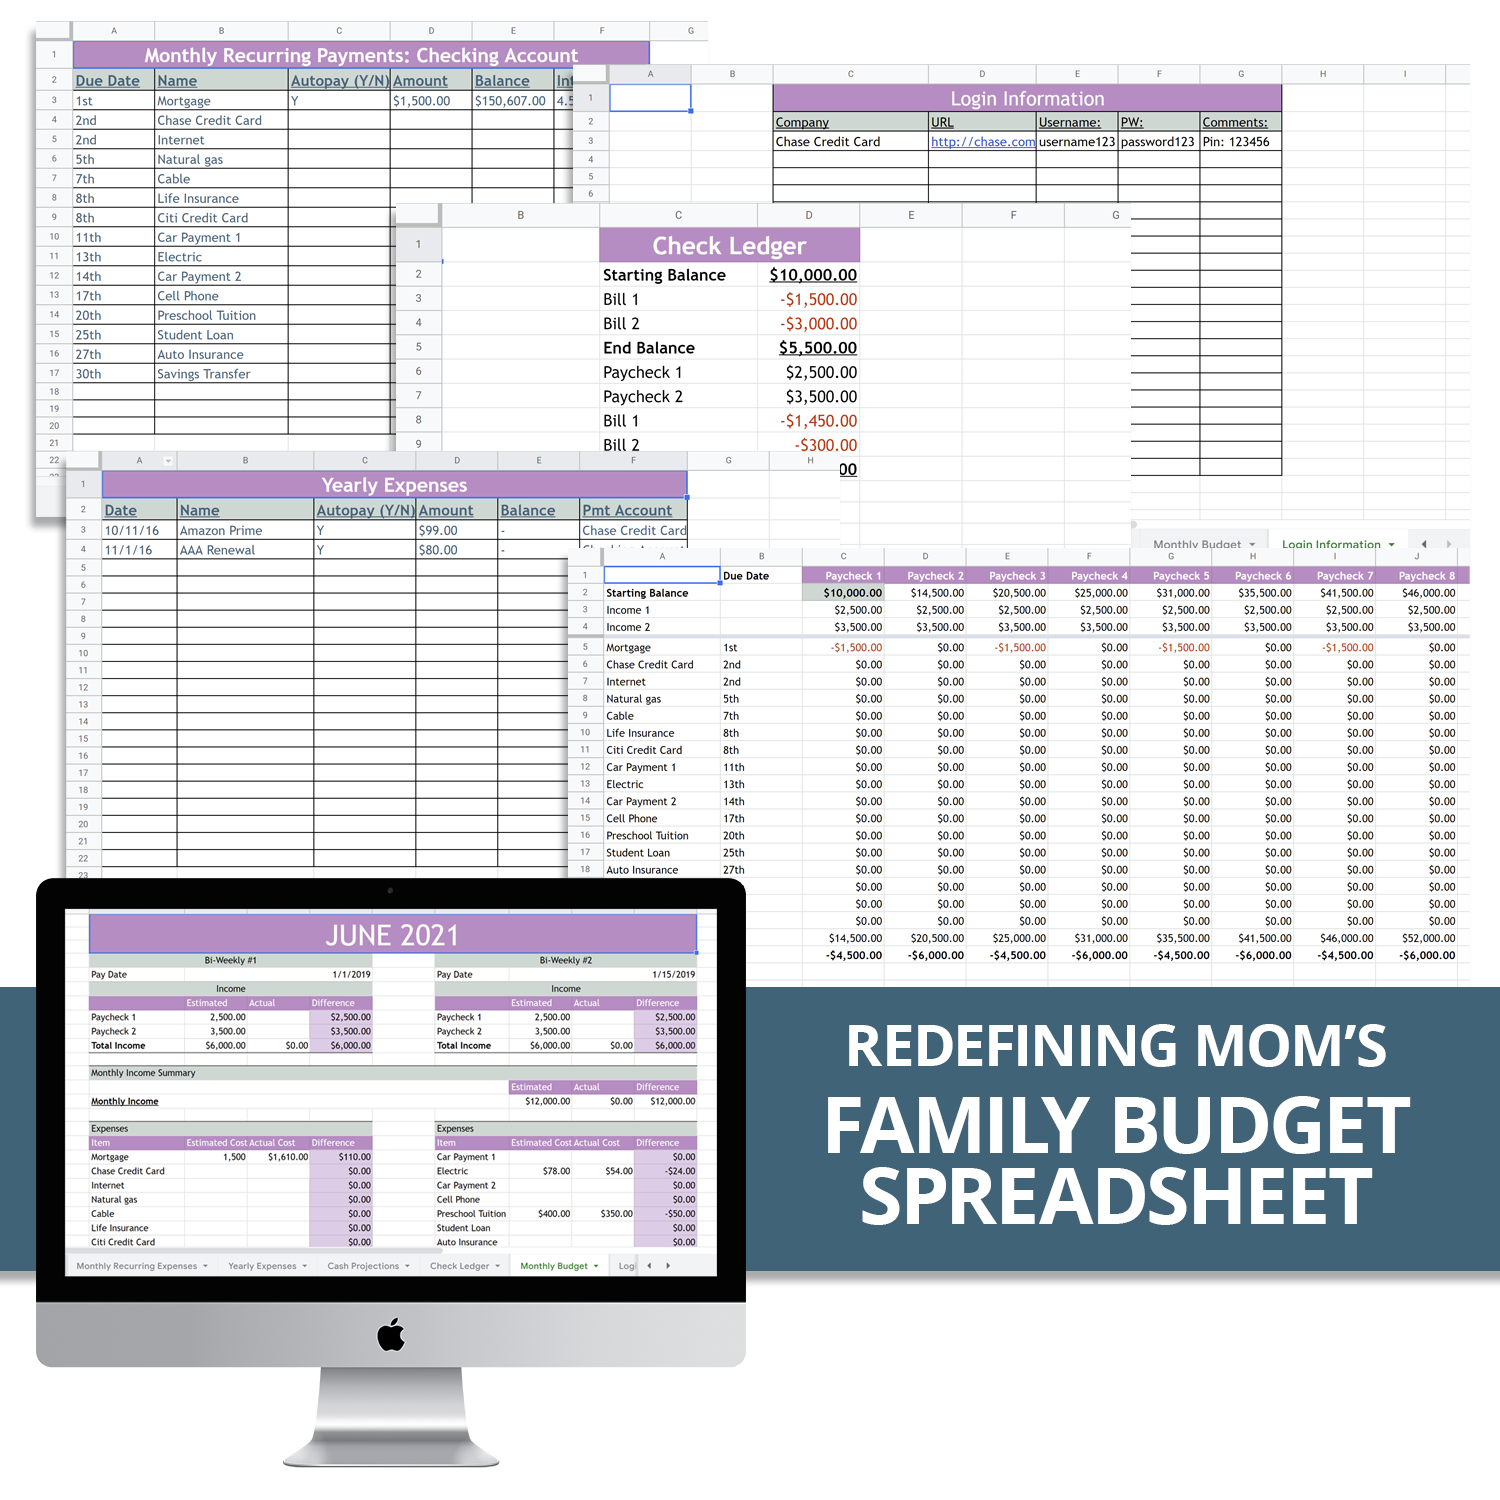 The family budget spreadsheet is your go-to resource for managing your family finances all in one place for Google Sheets